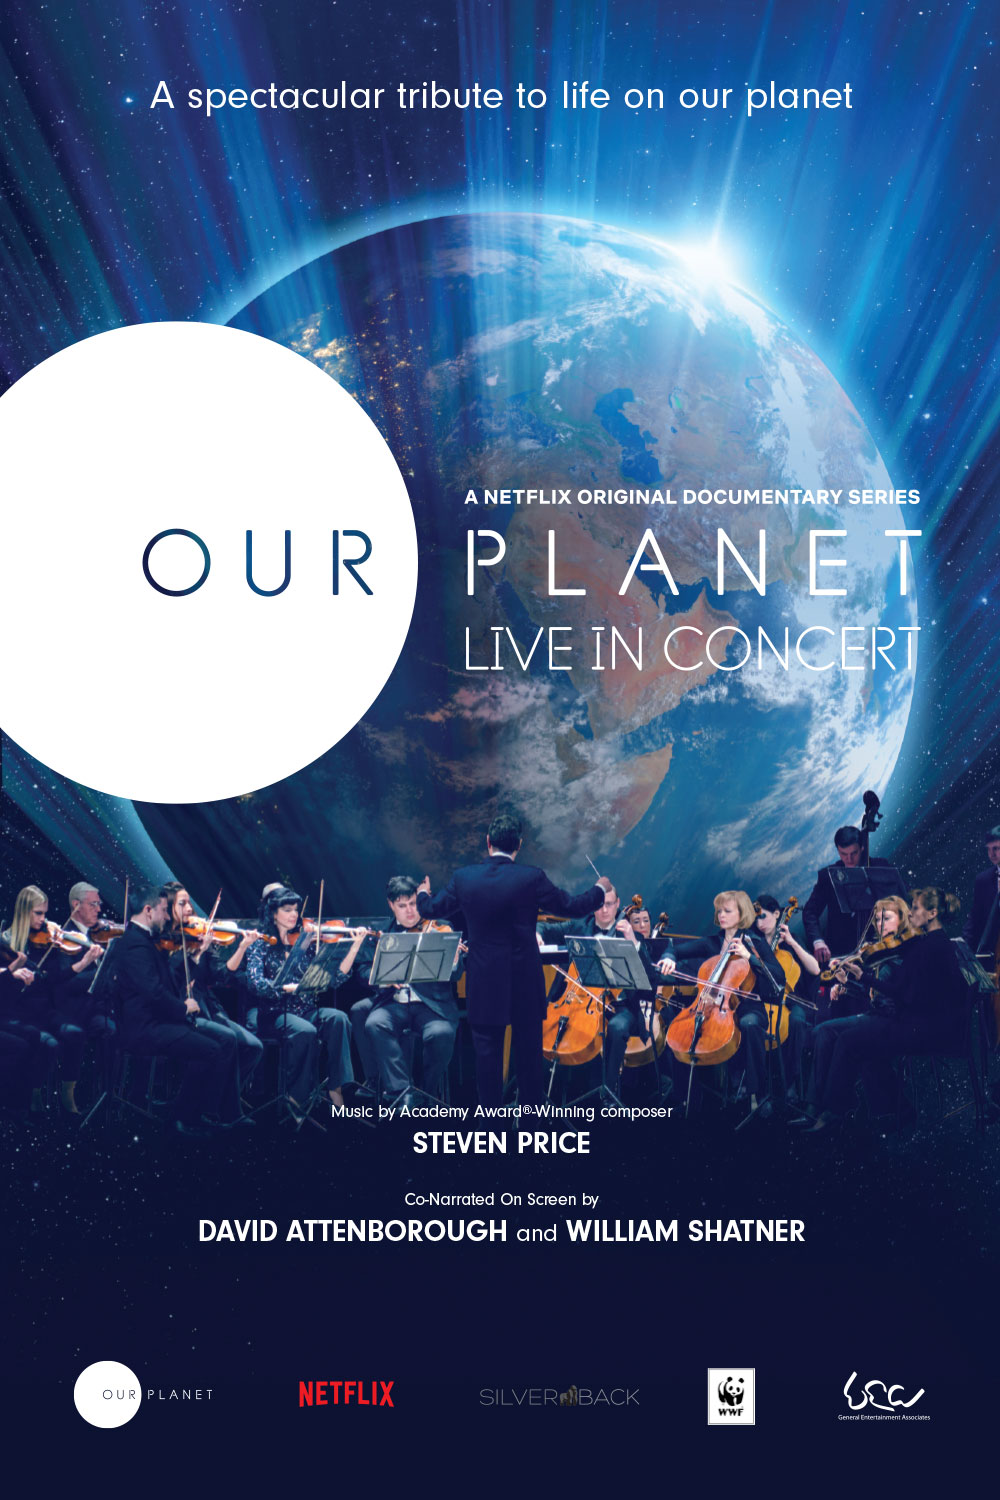 Image for Our Planet Live In Concert